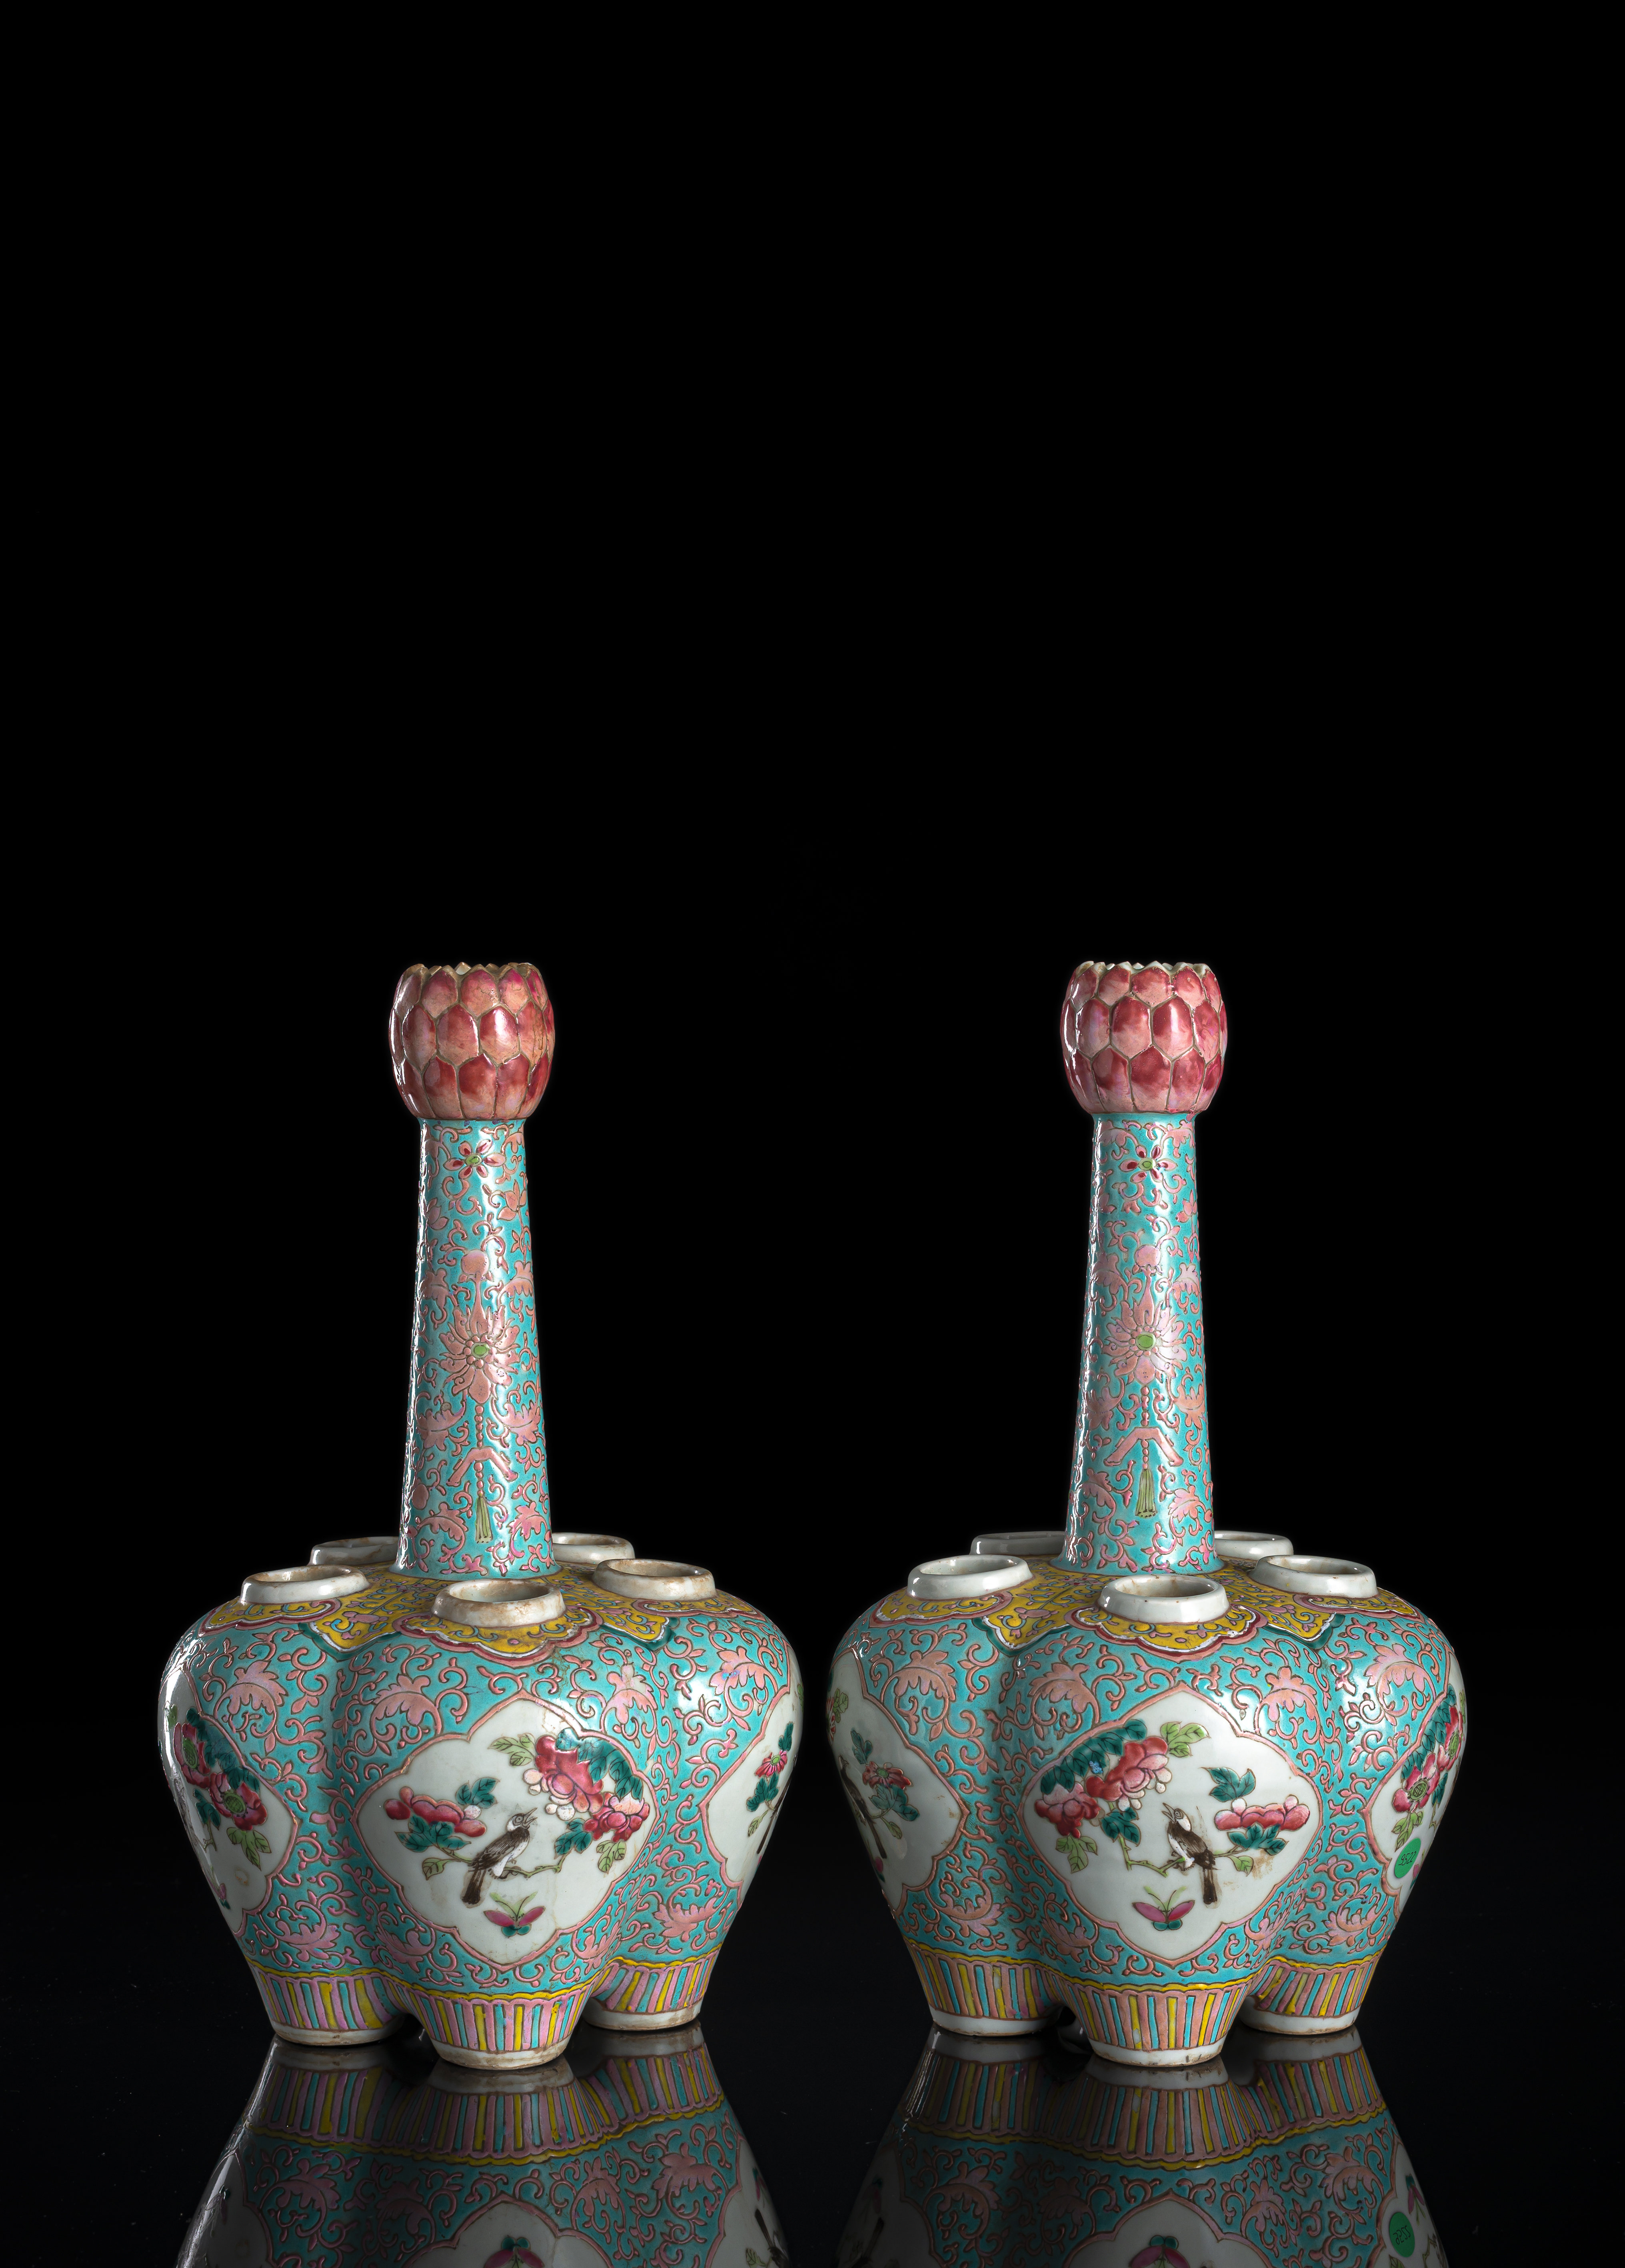 A PAIR OF 'FAMILLE ROSE' PORCELAIN TULIP VASES WITH MAGPIES INSIDE QUADRILOBED RESERVES